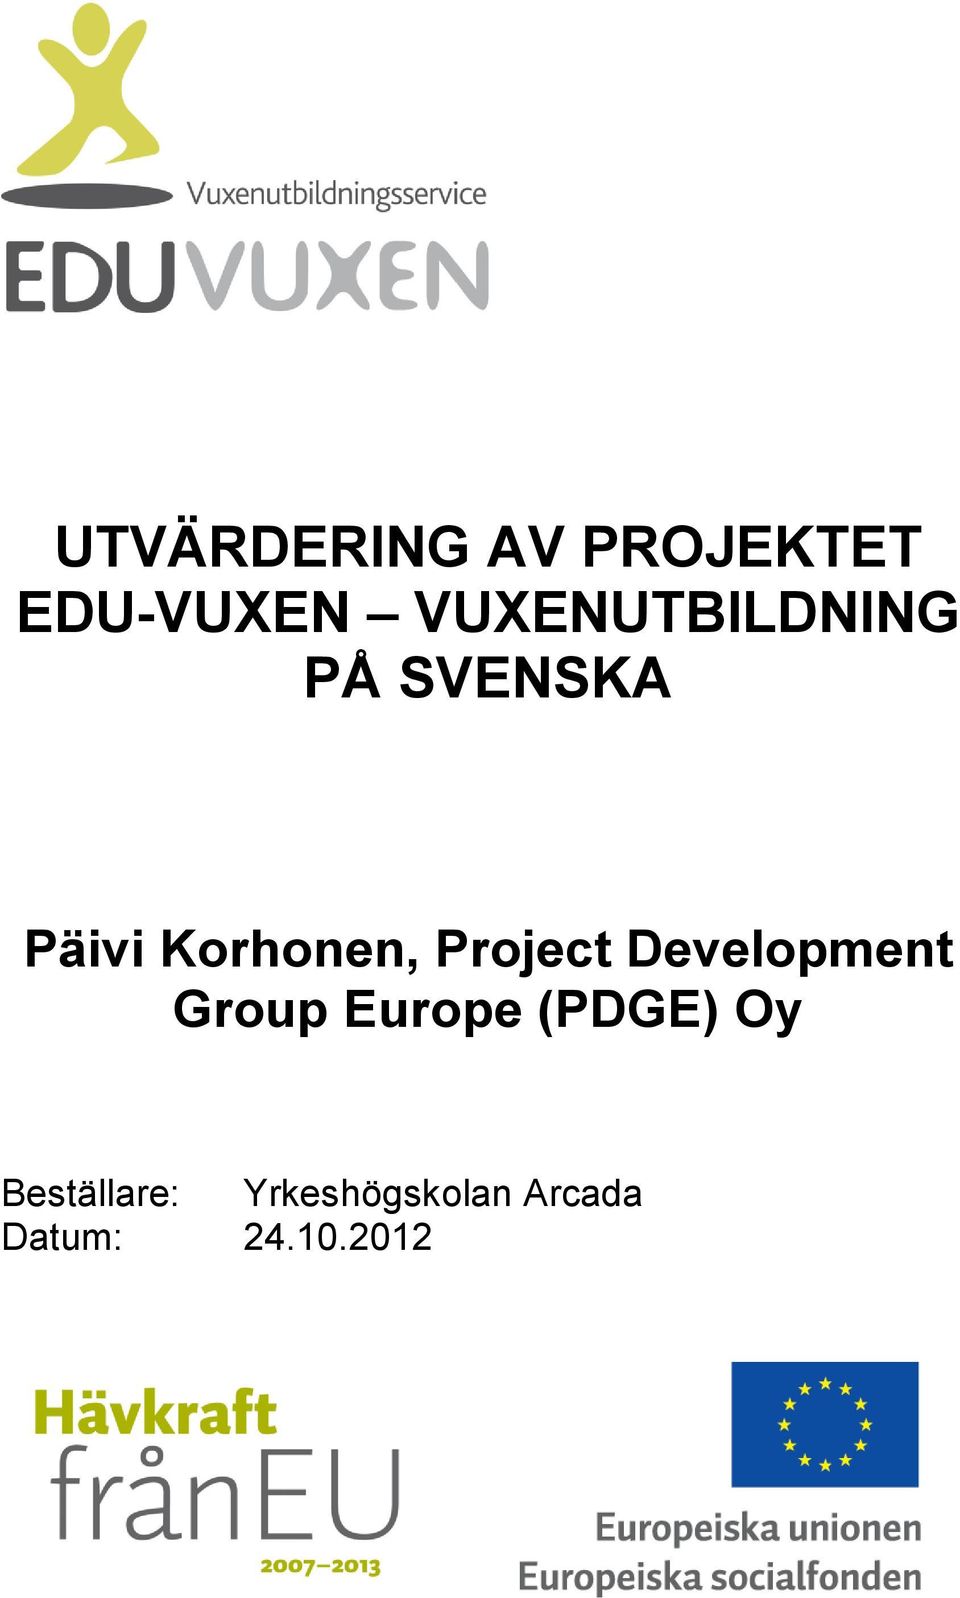 Project Development Group Europe (PDGE) Oy